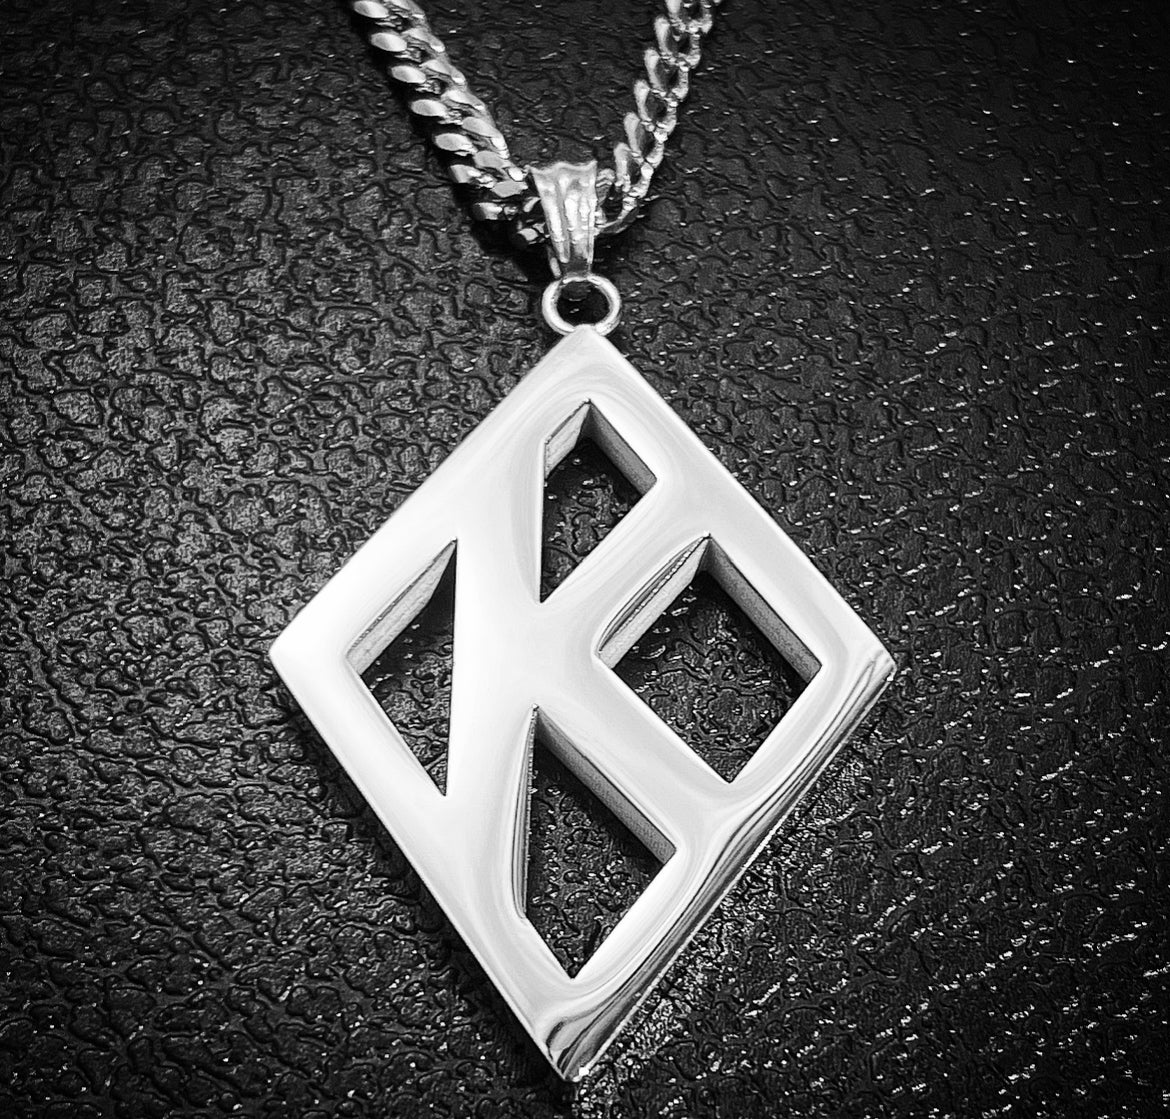 A beyond stunning Kappa Alpha Psi floating K necklace and charm made with solid stainless steel Silver. This pendant is made to last for generations and generations, perfect for that special Kappa Alpha Psi member. The ultimate gift to show off your fraternity pride is here!  • Official Kappa Alpha Psi Licensed Product: passed through examination and requirements by the Fraternity as a whole.